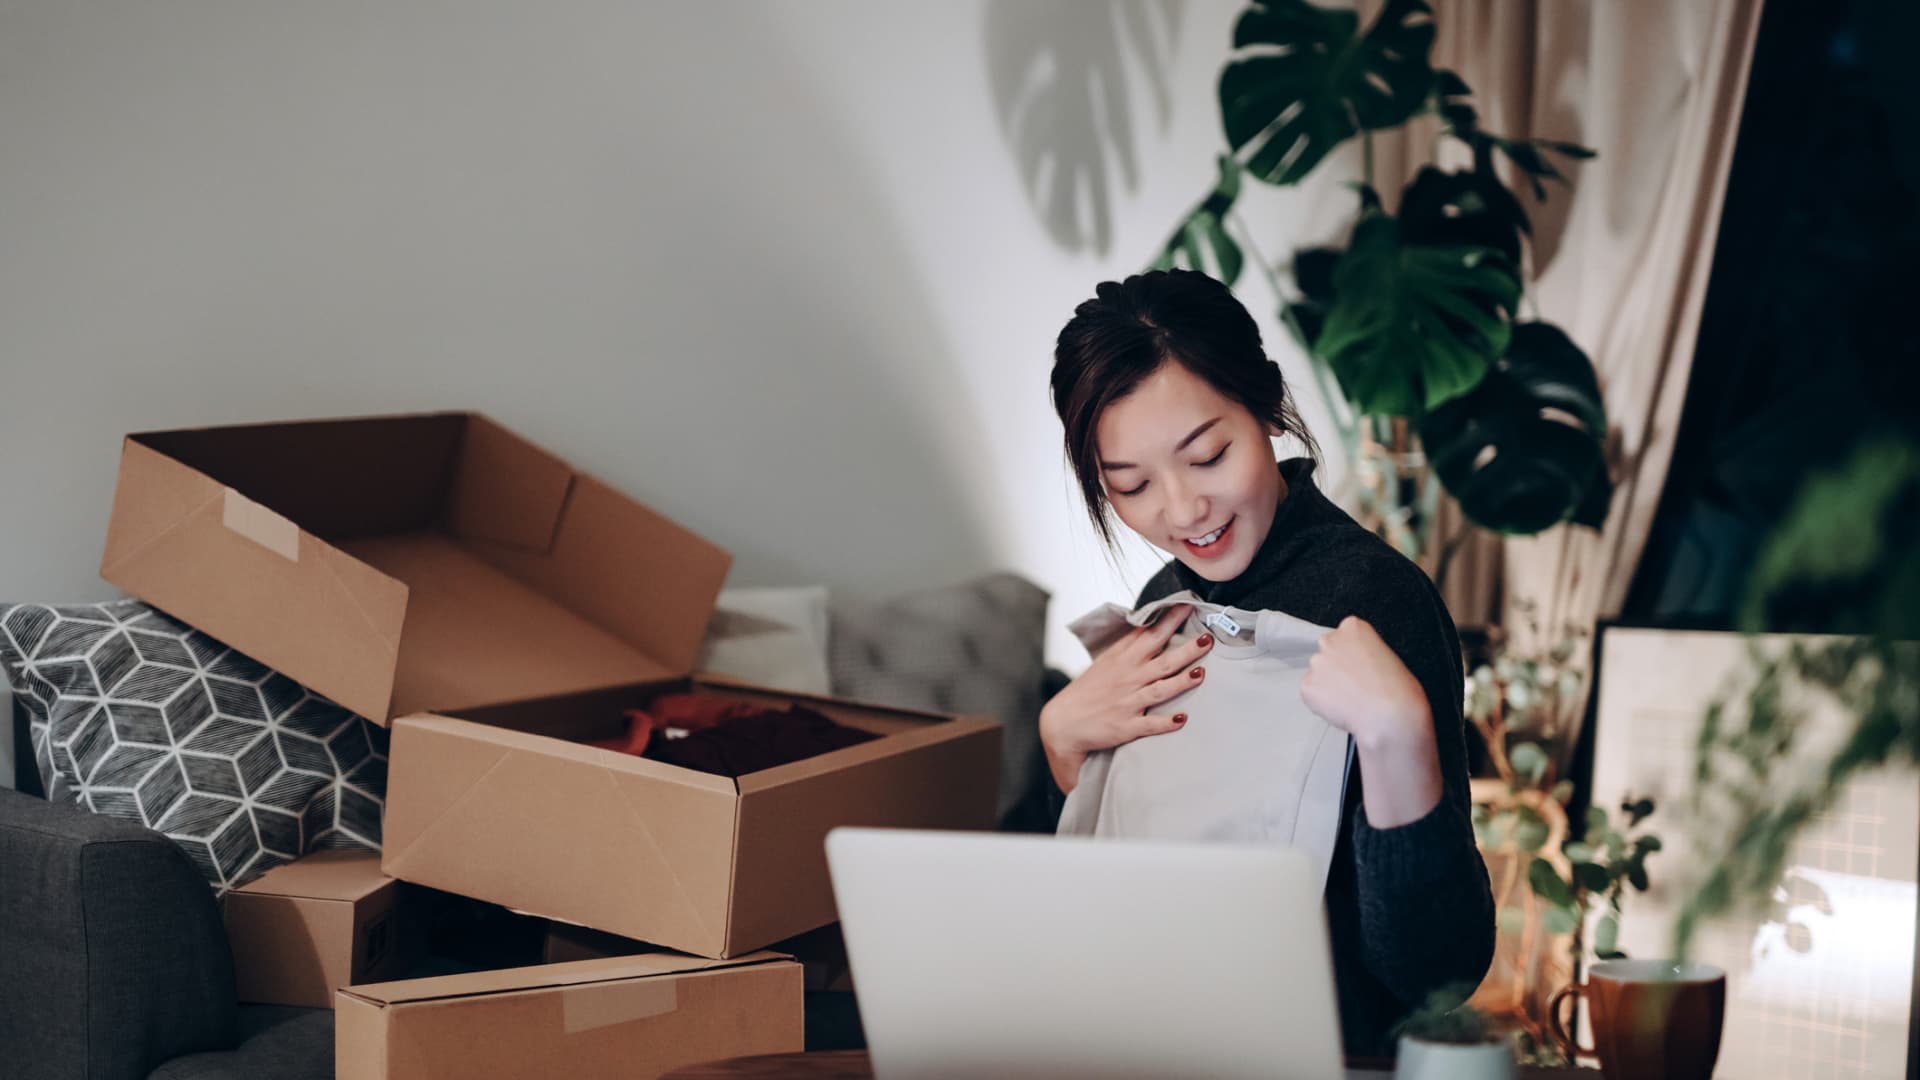 Gen Z’s shopping habits are heavily driven by TikTok and influencers: KPMG [Video]